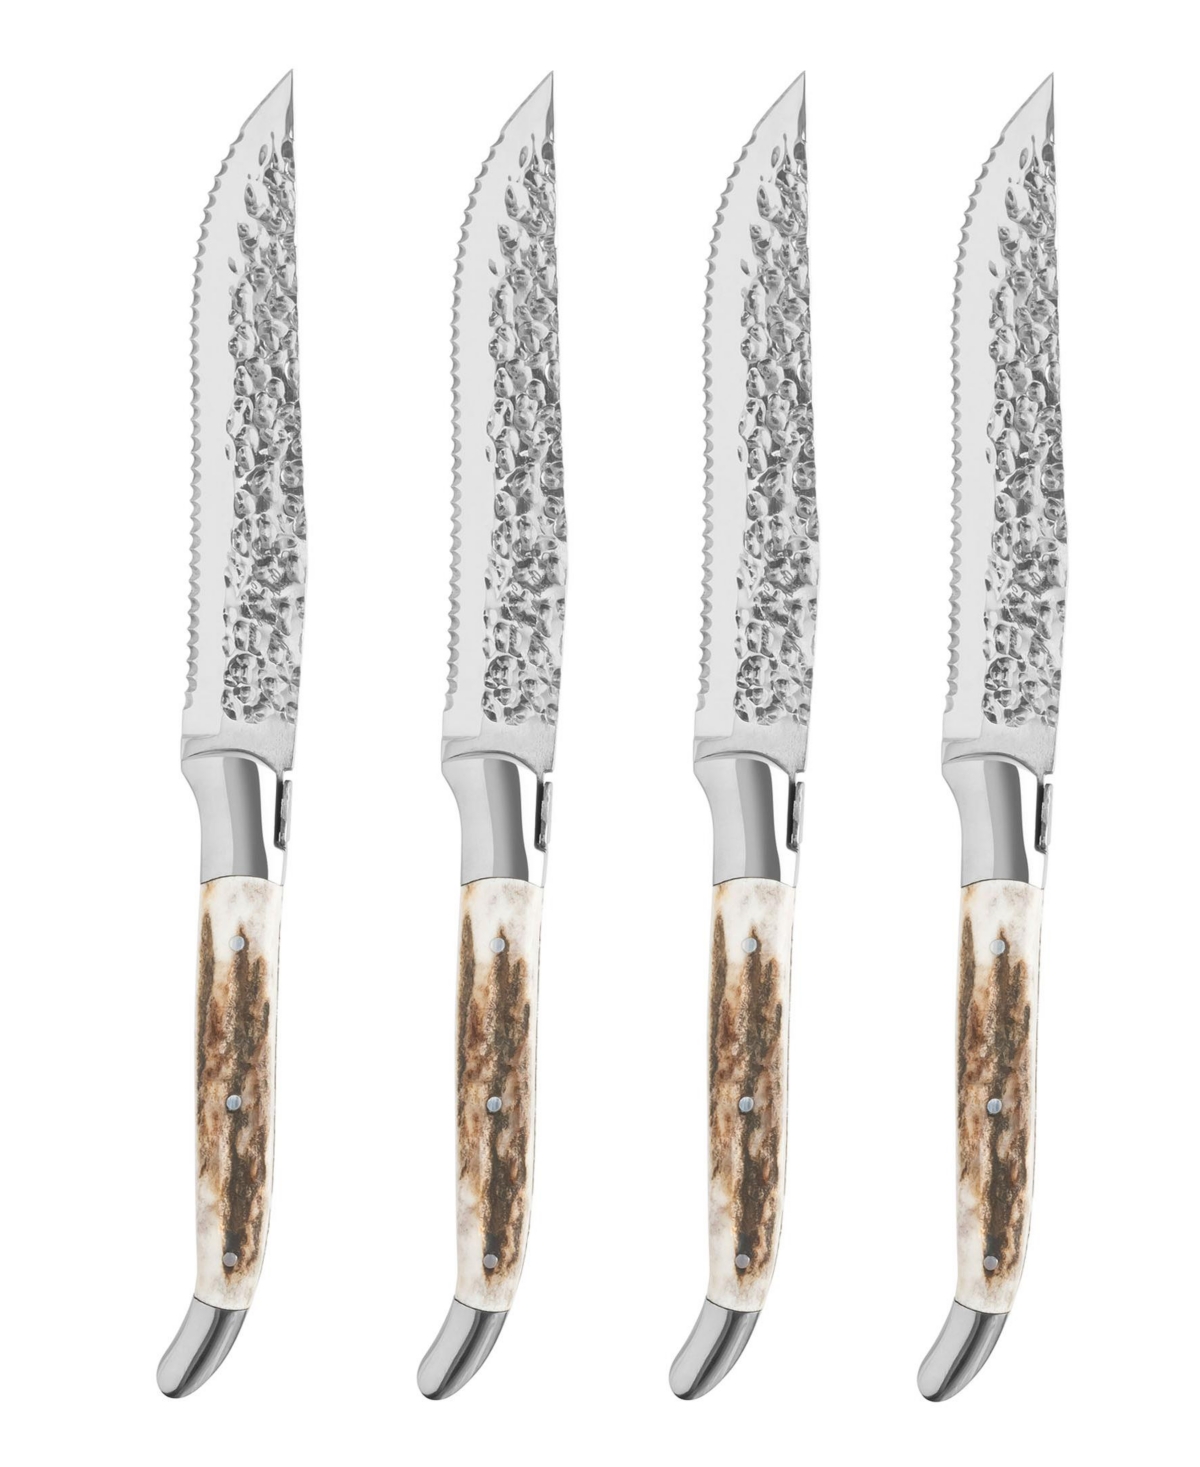 Shop French Home Stainless-steel Laguiole Set Of 4, Connoisseur Bbq Steak Knives With Deer Horn Handles